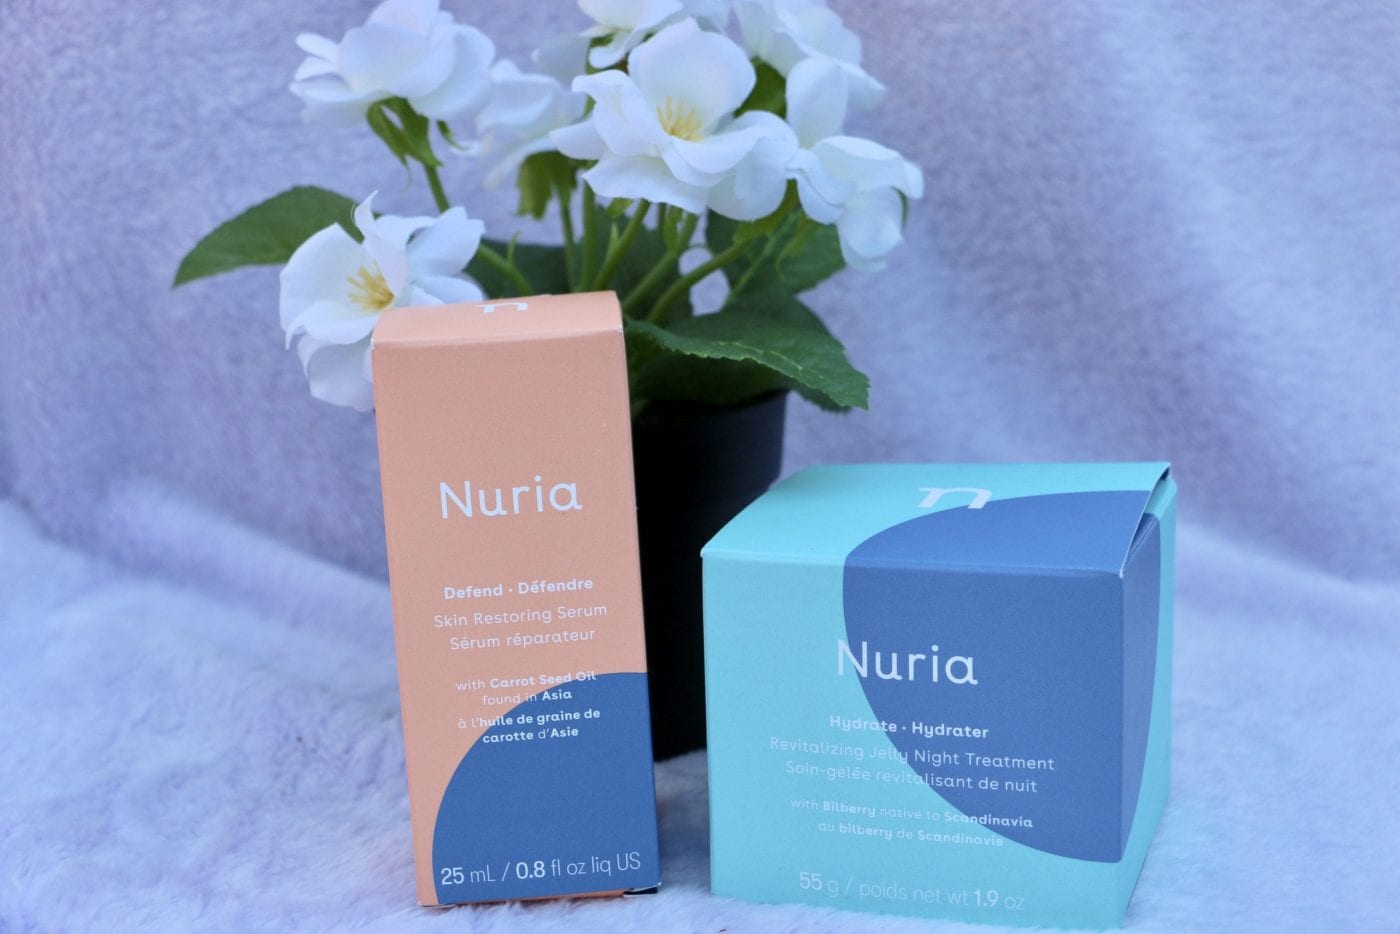 Beauty with a cause: Nuria, a vegan, and cruelty-free brand work closely with underprivileged women in India and Nepal.